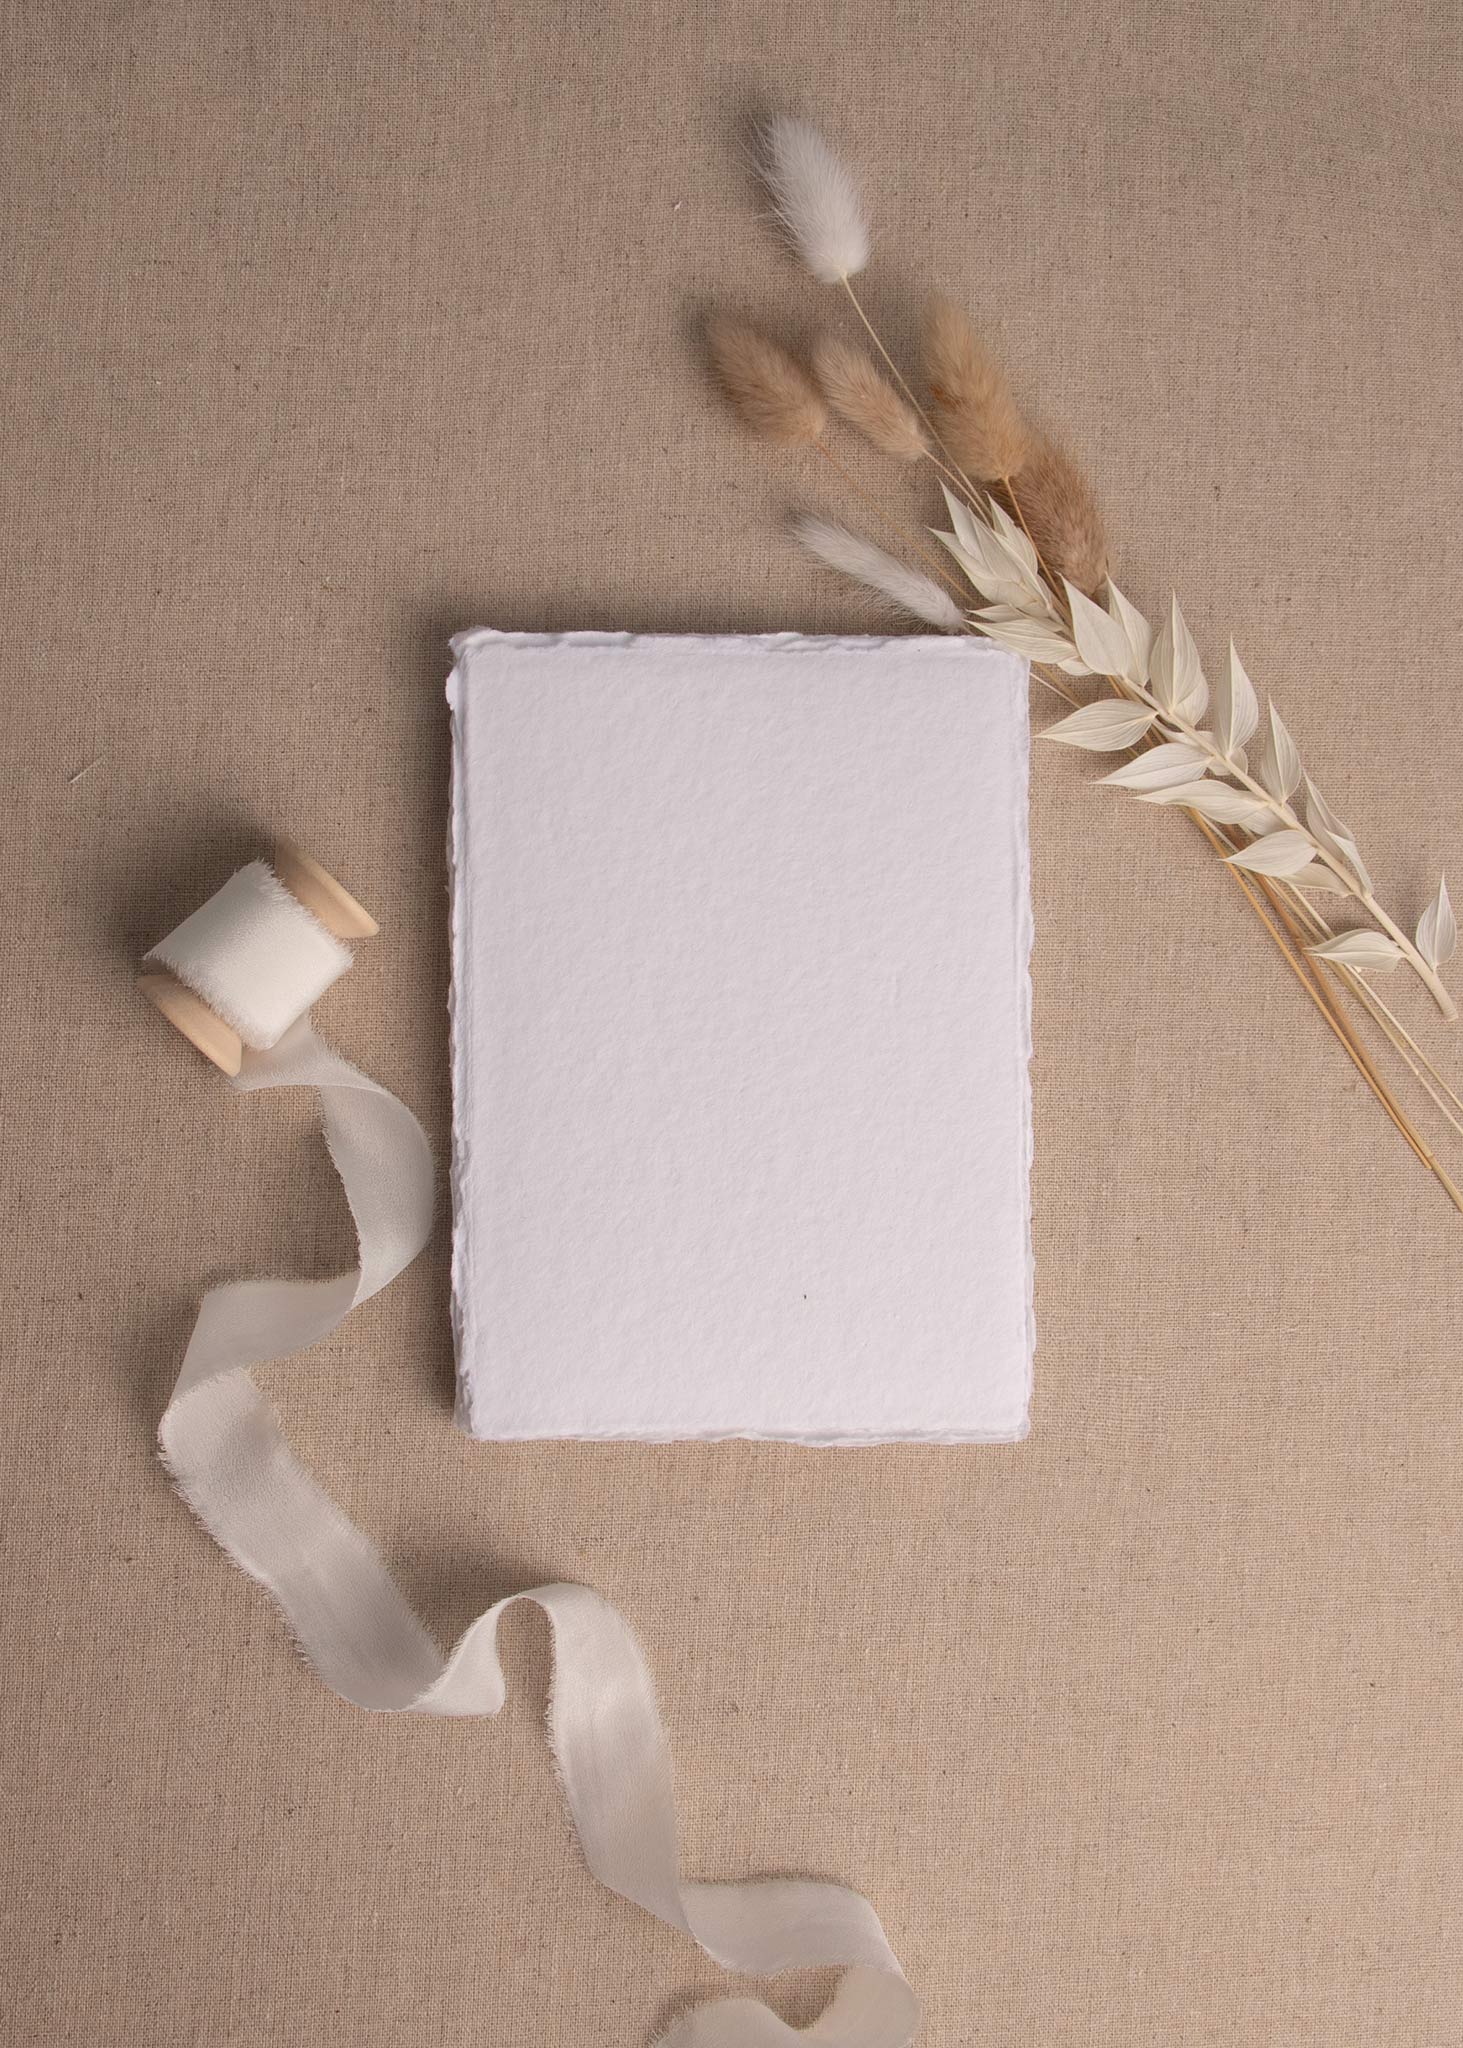 Handmade Deckle Edge Indian Cotton Paper Pack - Ivory - 25 Sheets